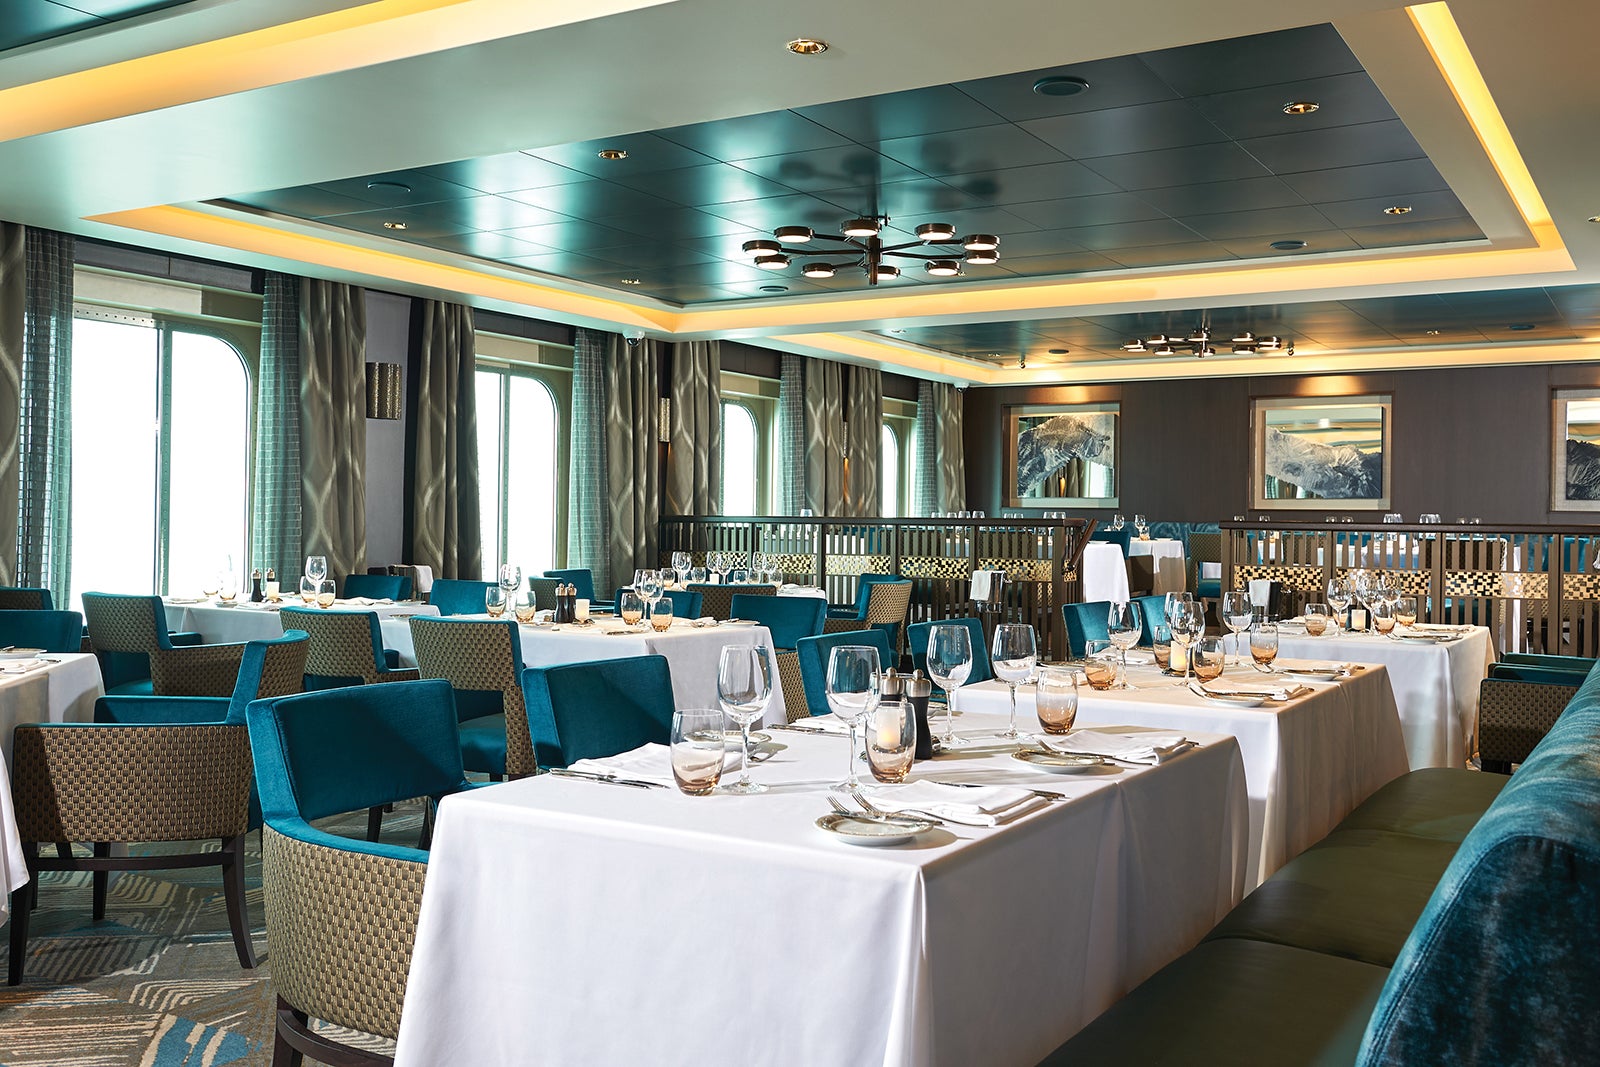 Beginner's guide to dining on a cruise - Cruiseable